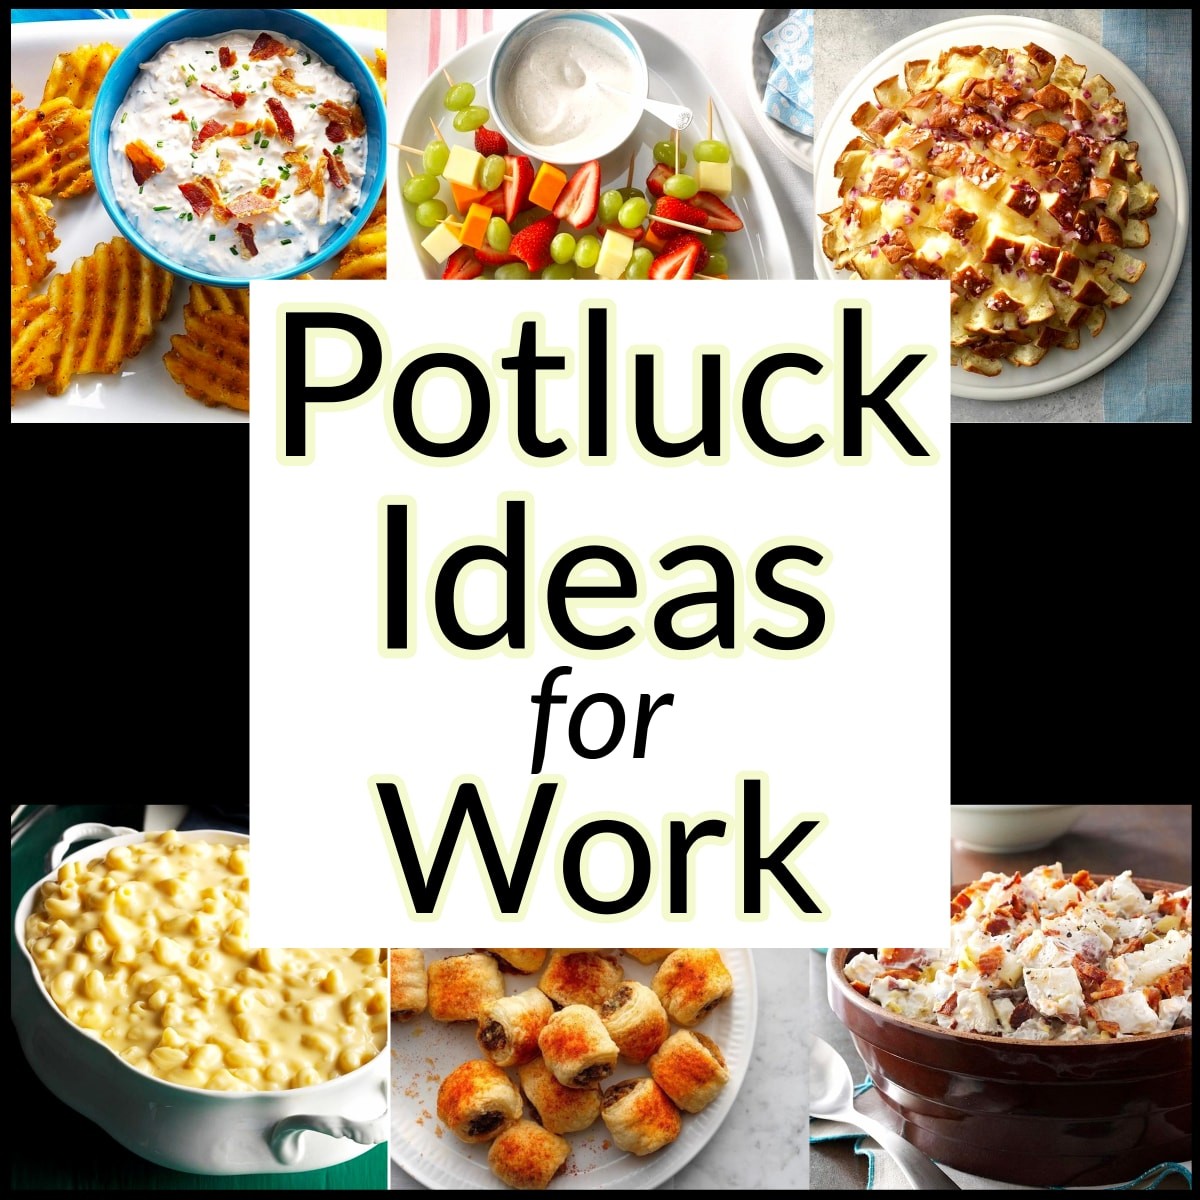 Potluck Ideas For Work - the easiest dish to buy or make for an office potluck at work. Fun, quick and CHEAP potluck ideas that will impress your co-workers plus they travel well!